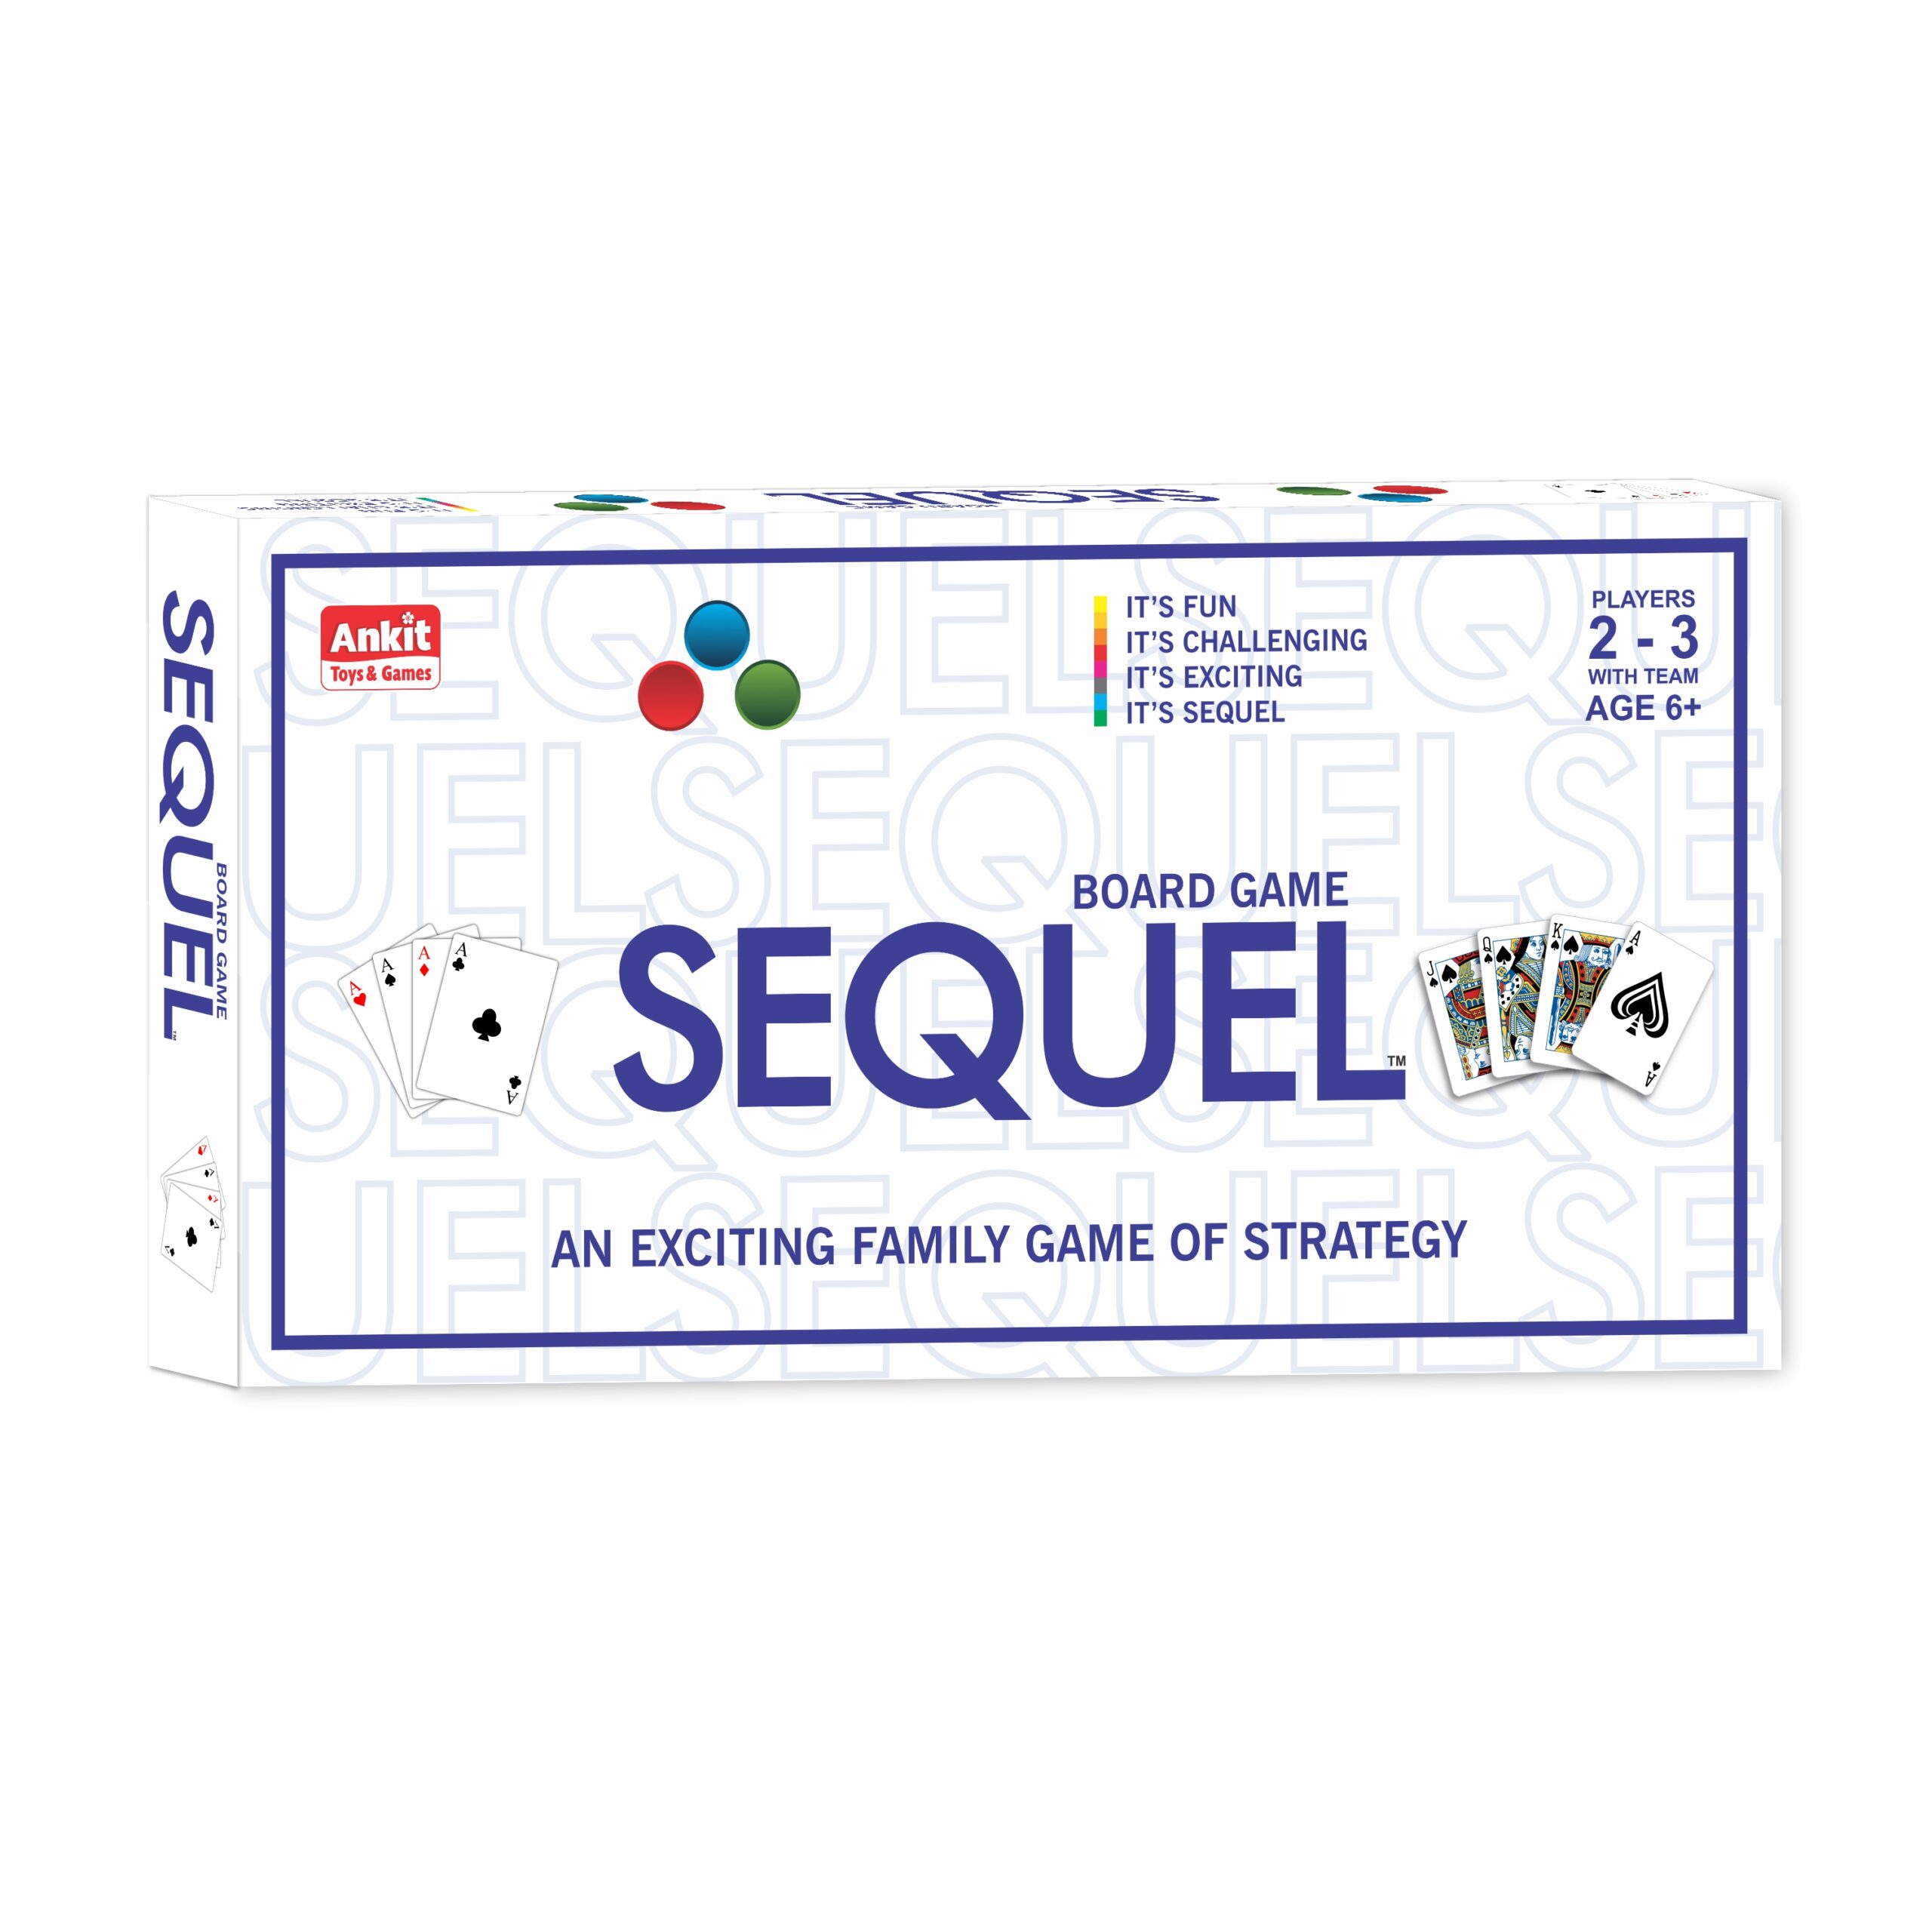 Ankit Toys Sequel (Big size) Board game